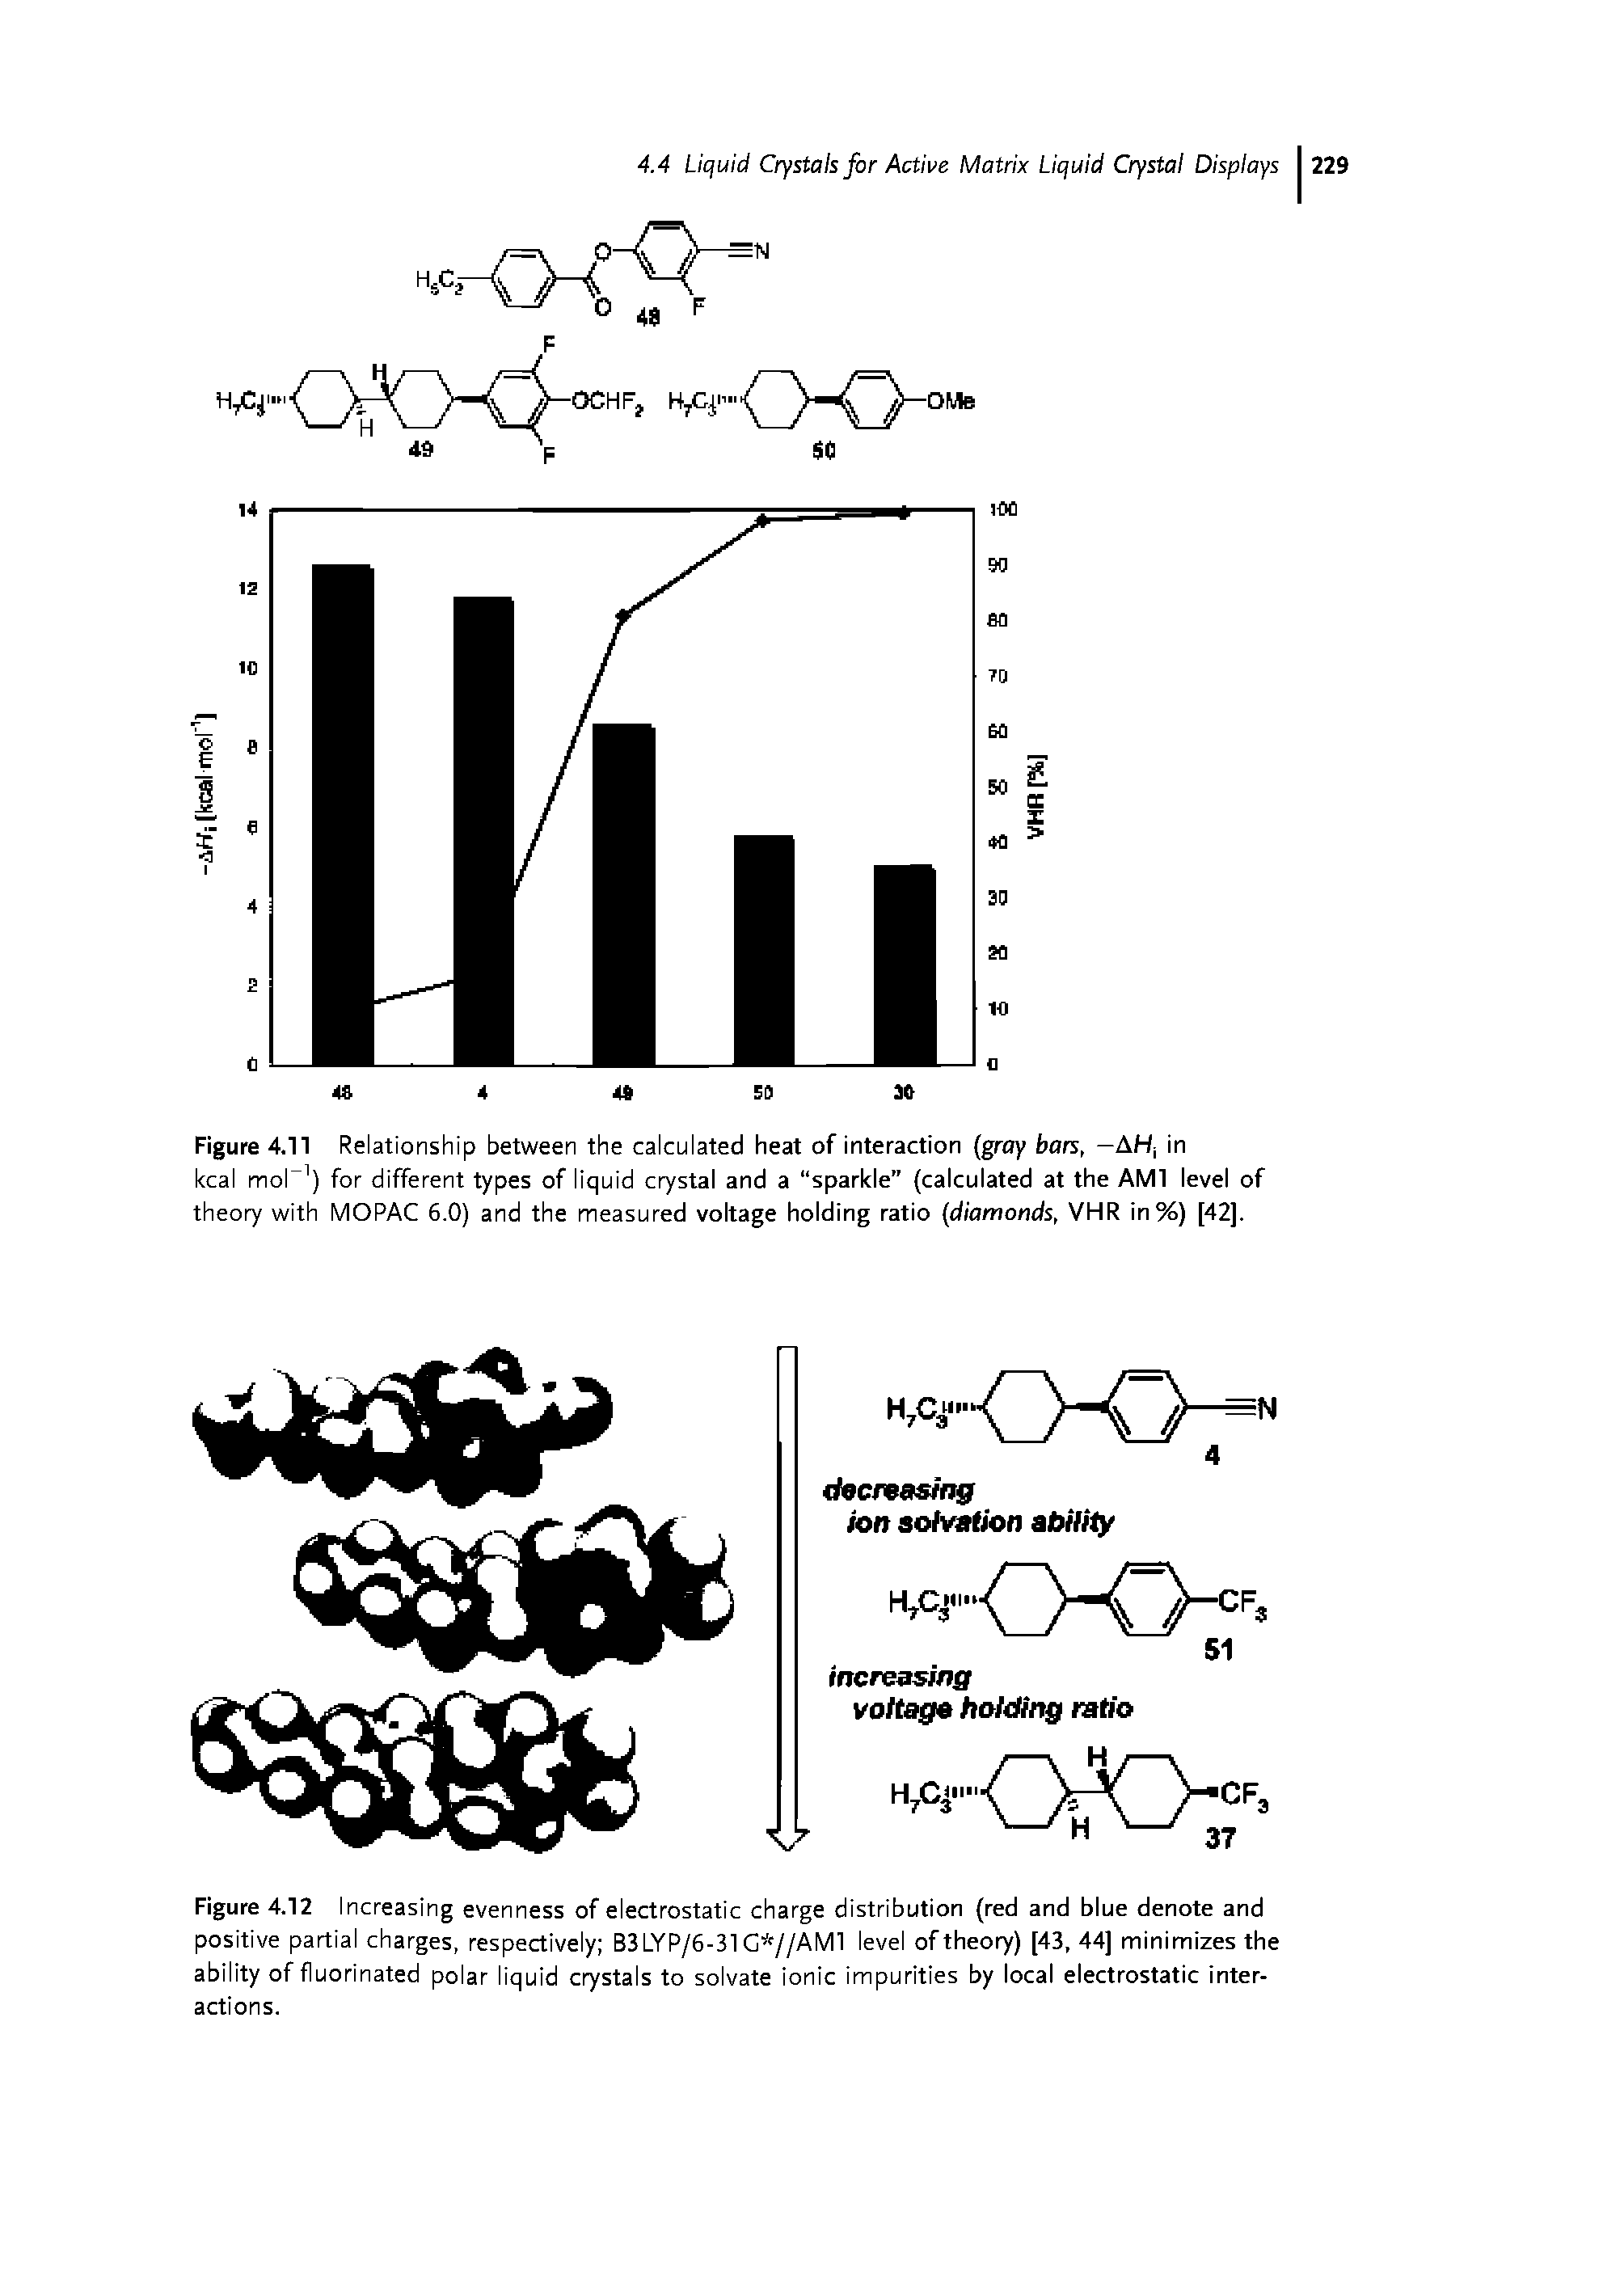 Figure 4.12 Increasing evenness of electrostatic charge distribution (red and blue denote and positive partial charges, respectively B3 LYP/6-31 G //AM1 level of theory) [43, 44] minimizes the ability of fluorinated polar liquid c stals to solvate ionic impurities by local electrostatic interactions.